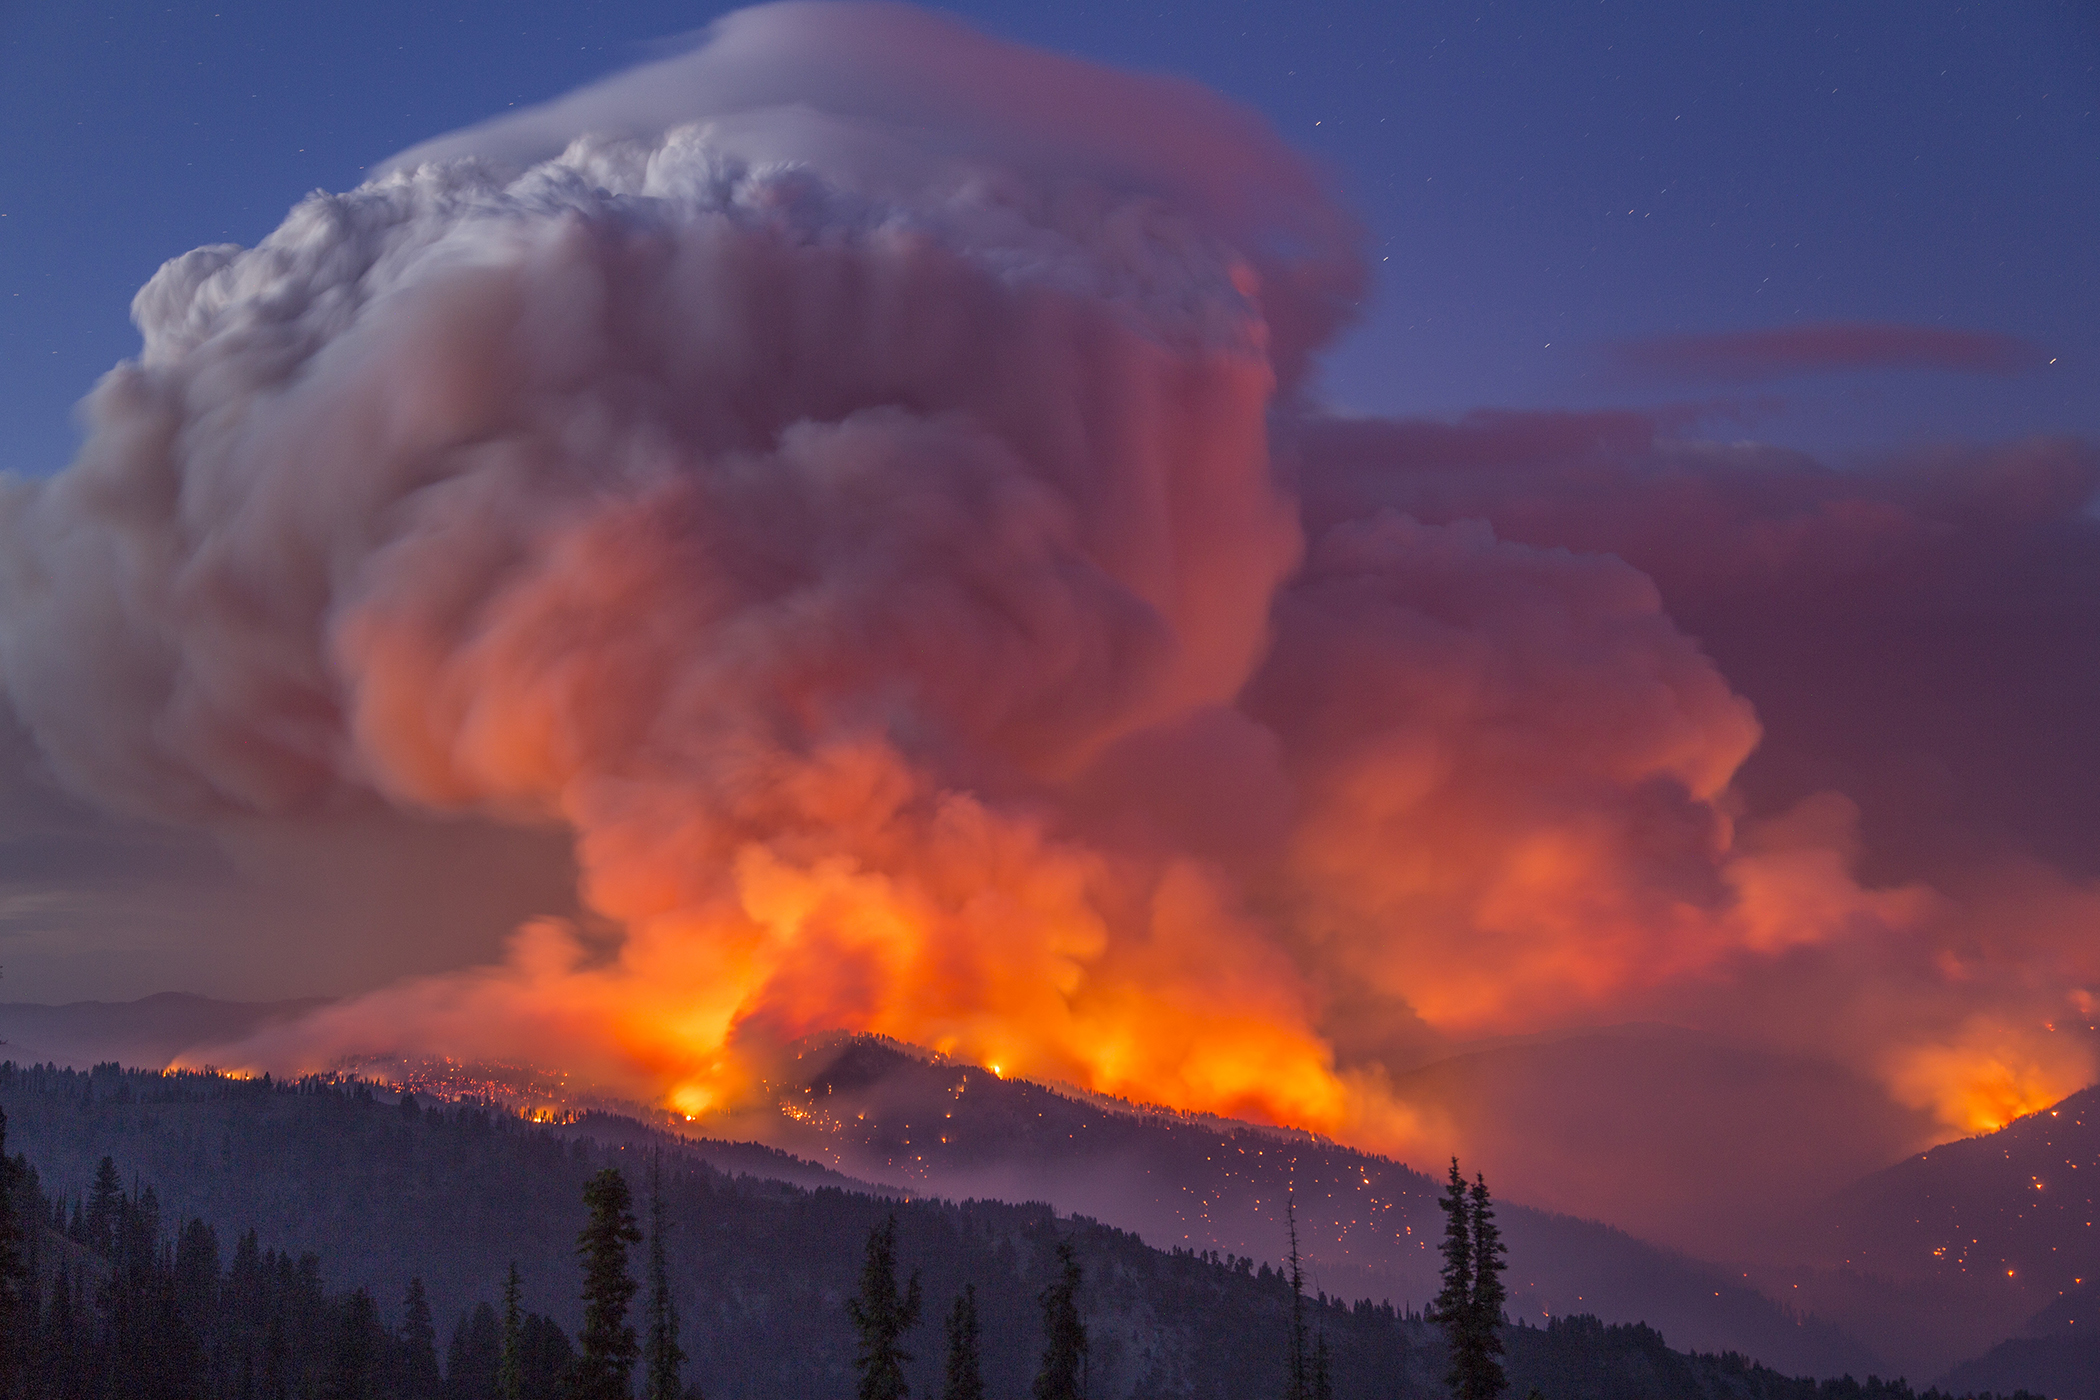 A giant smoke column is seen exploding from flames on a darkened hillside as a wildfire rages out of control.